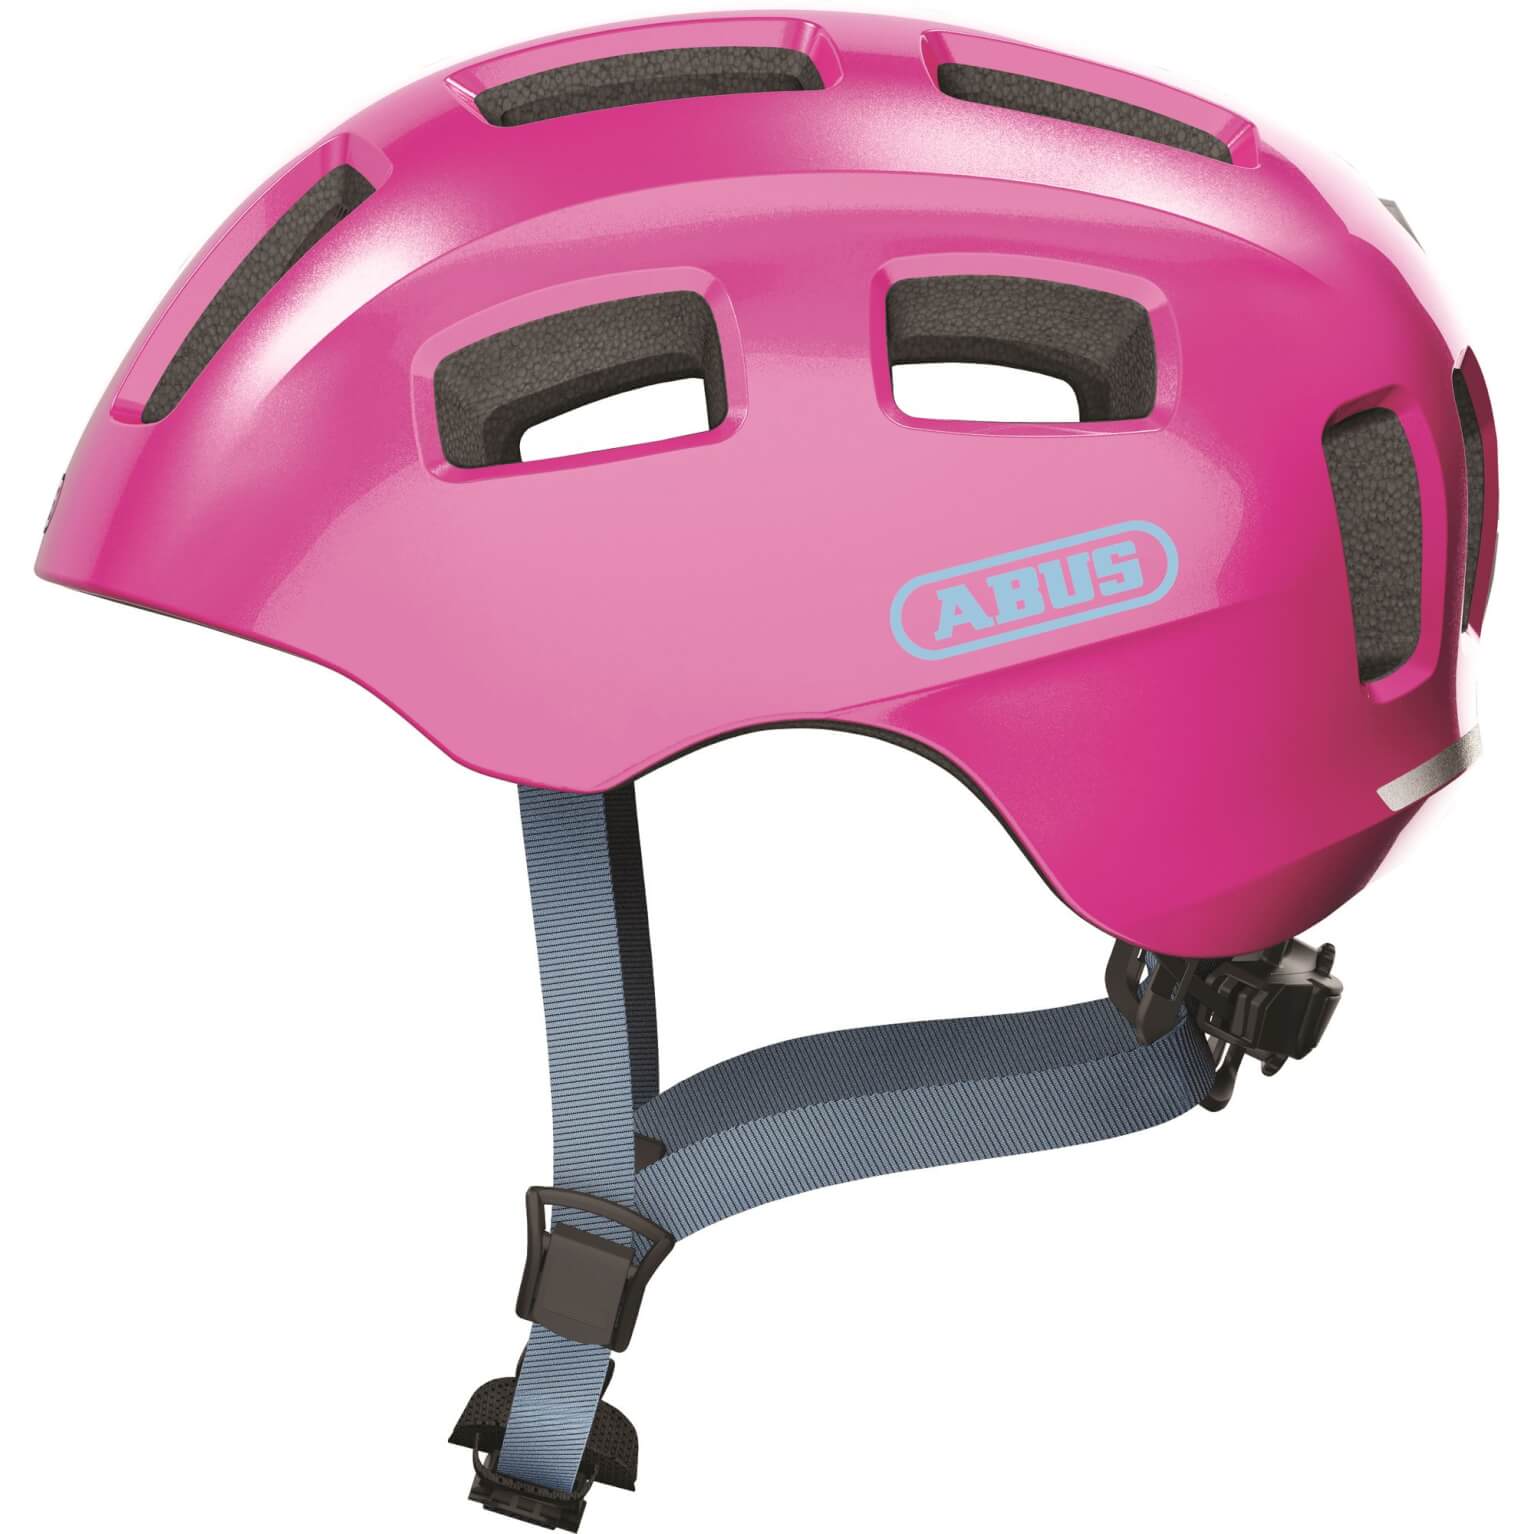 Abus helm Youn-I 2.0 sparkling pink S 48-54cm